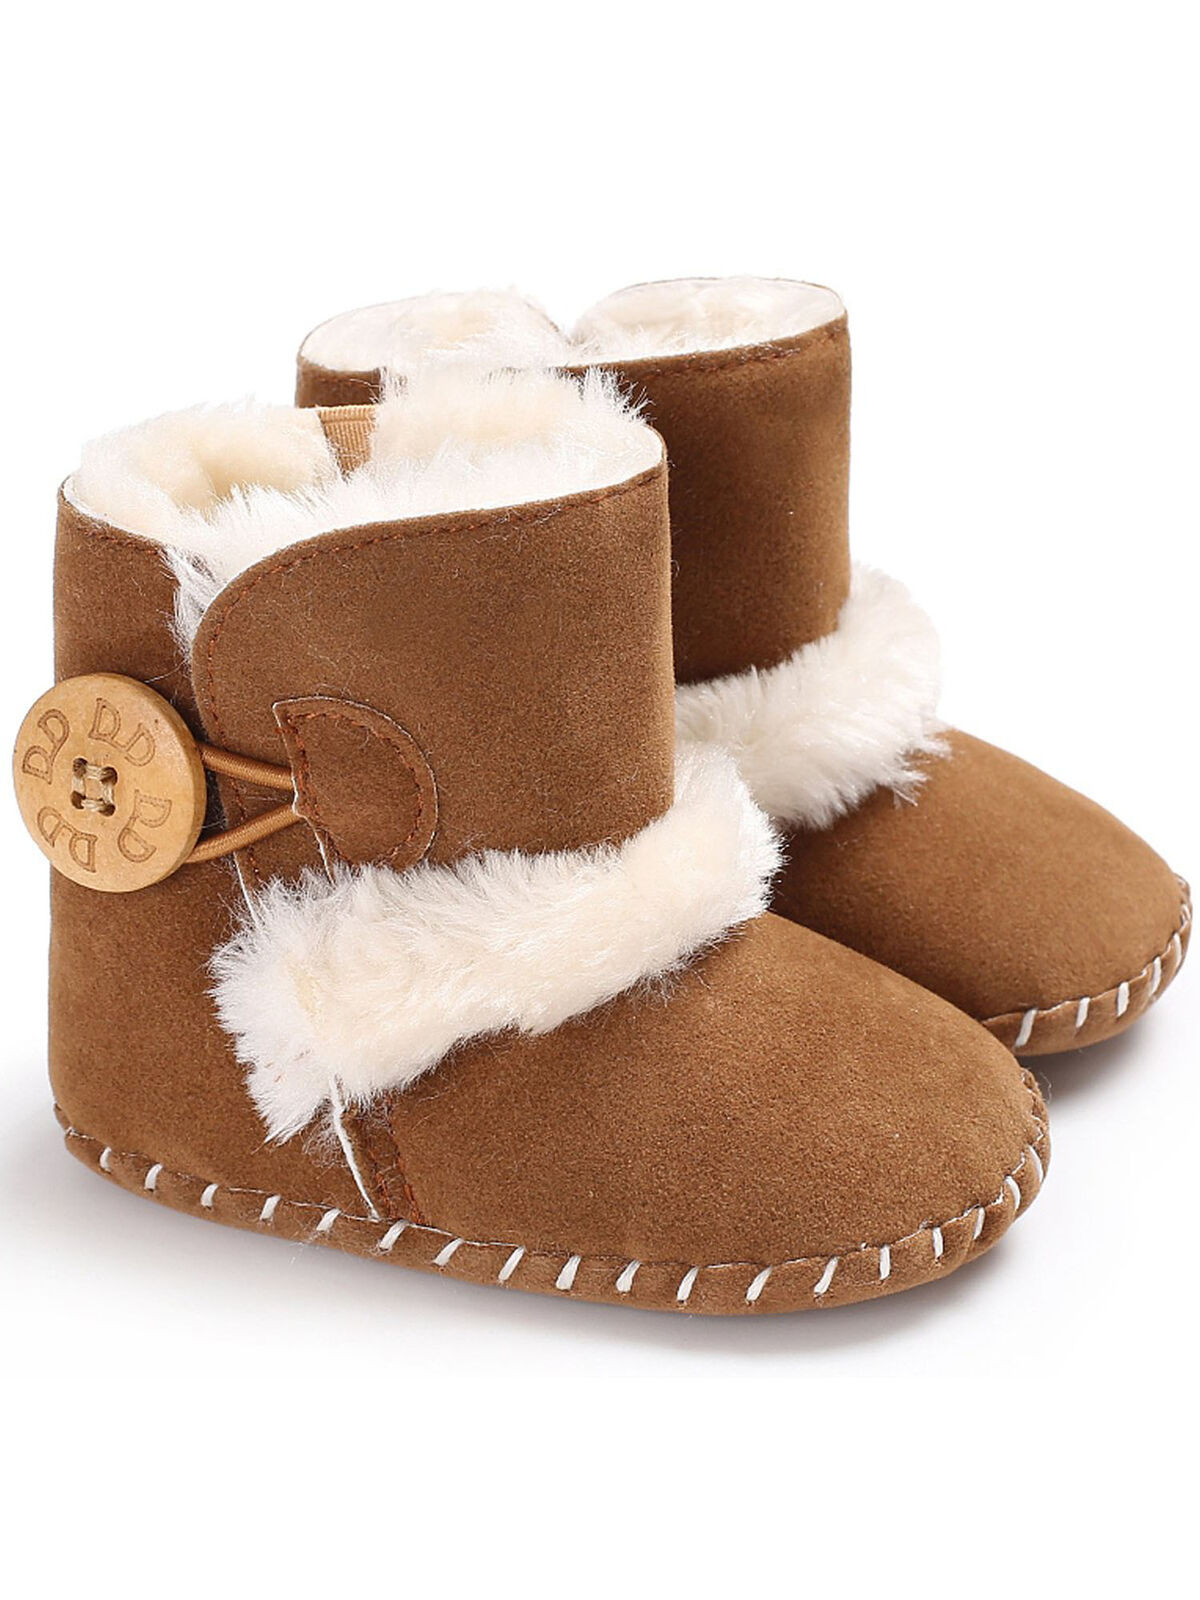 Baby Girl Boy Snow Boots Winter Half Boots Infant Kids New Soft Bottom Shoes - image 1 of 3